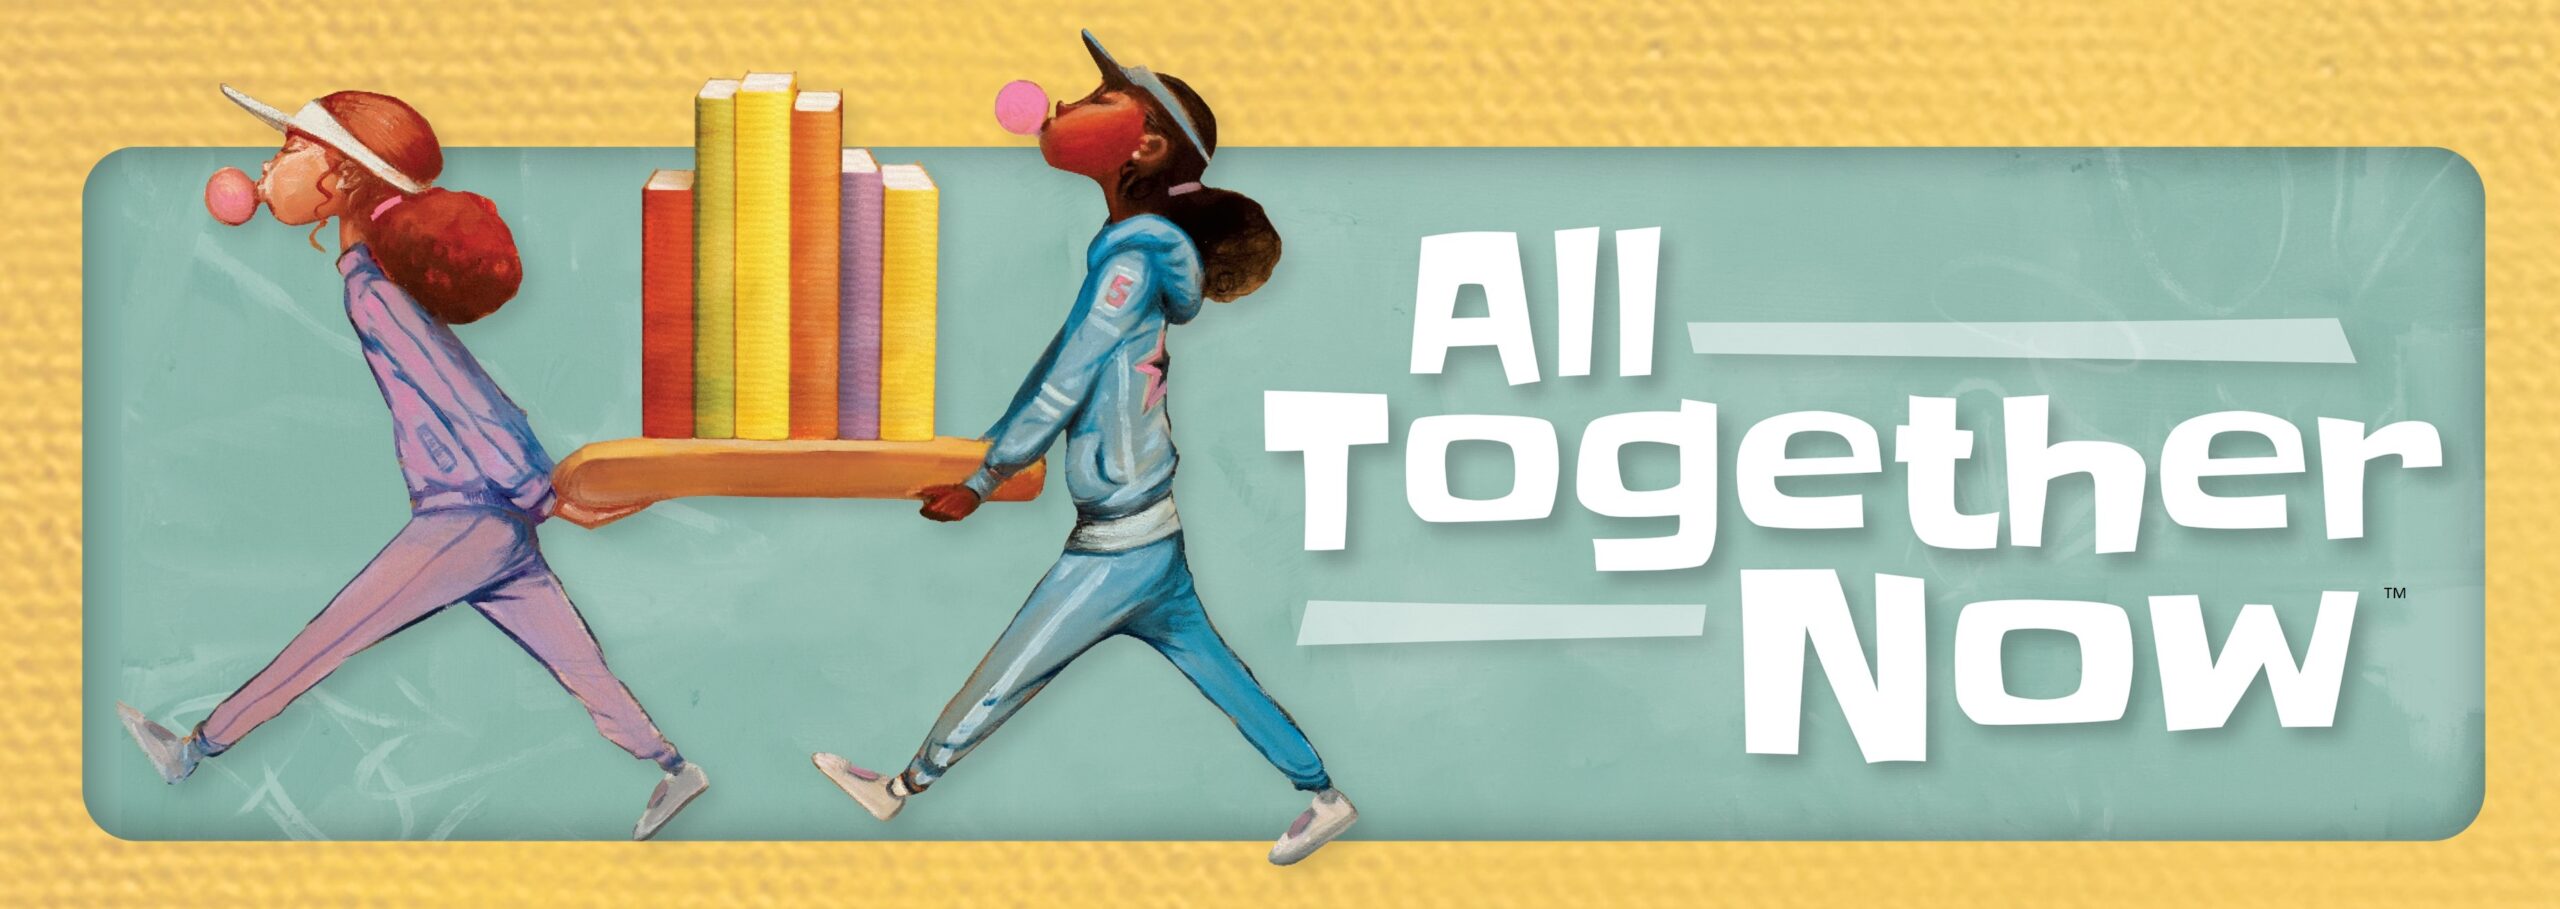 Summer Reading Challenge banner with the words "All together now"